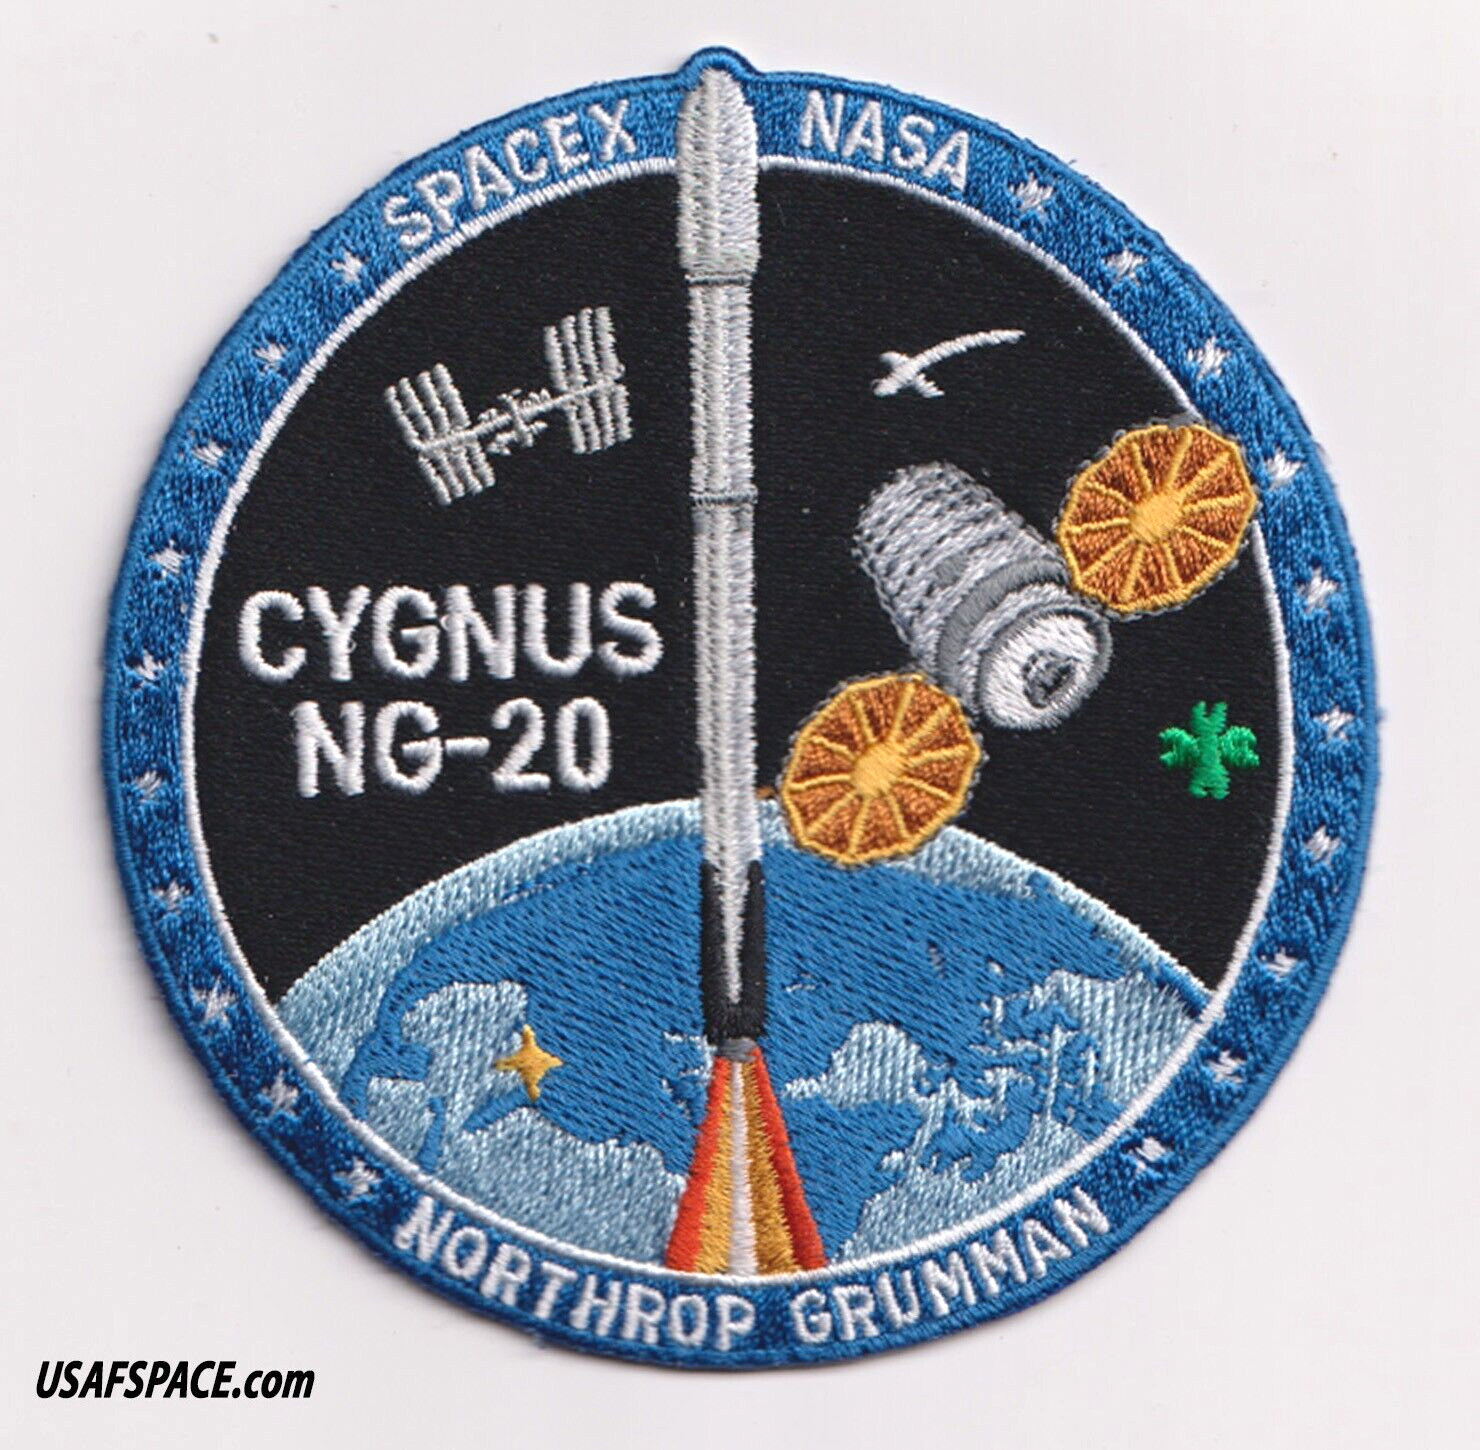 Authentic CYGNUS NG-20 SPACEX NASA ISS RESUPLY SATELLITE Employee PATCH